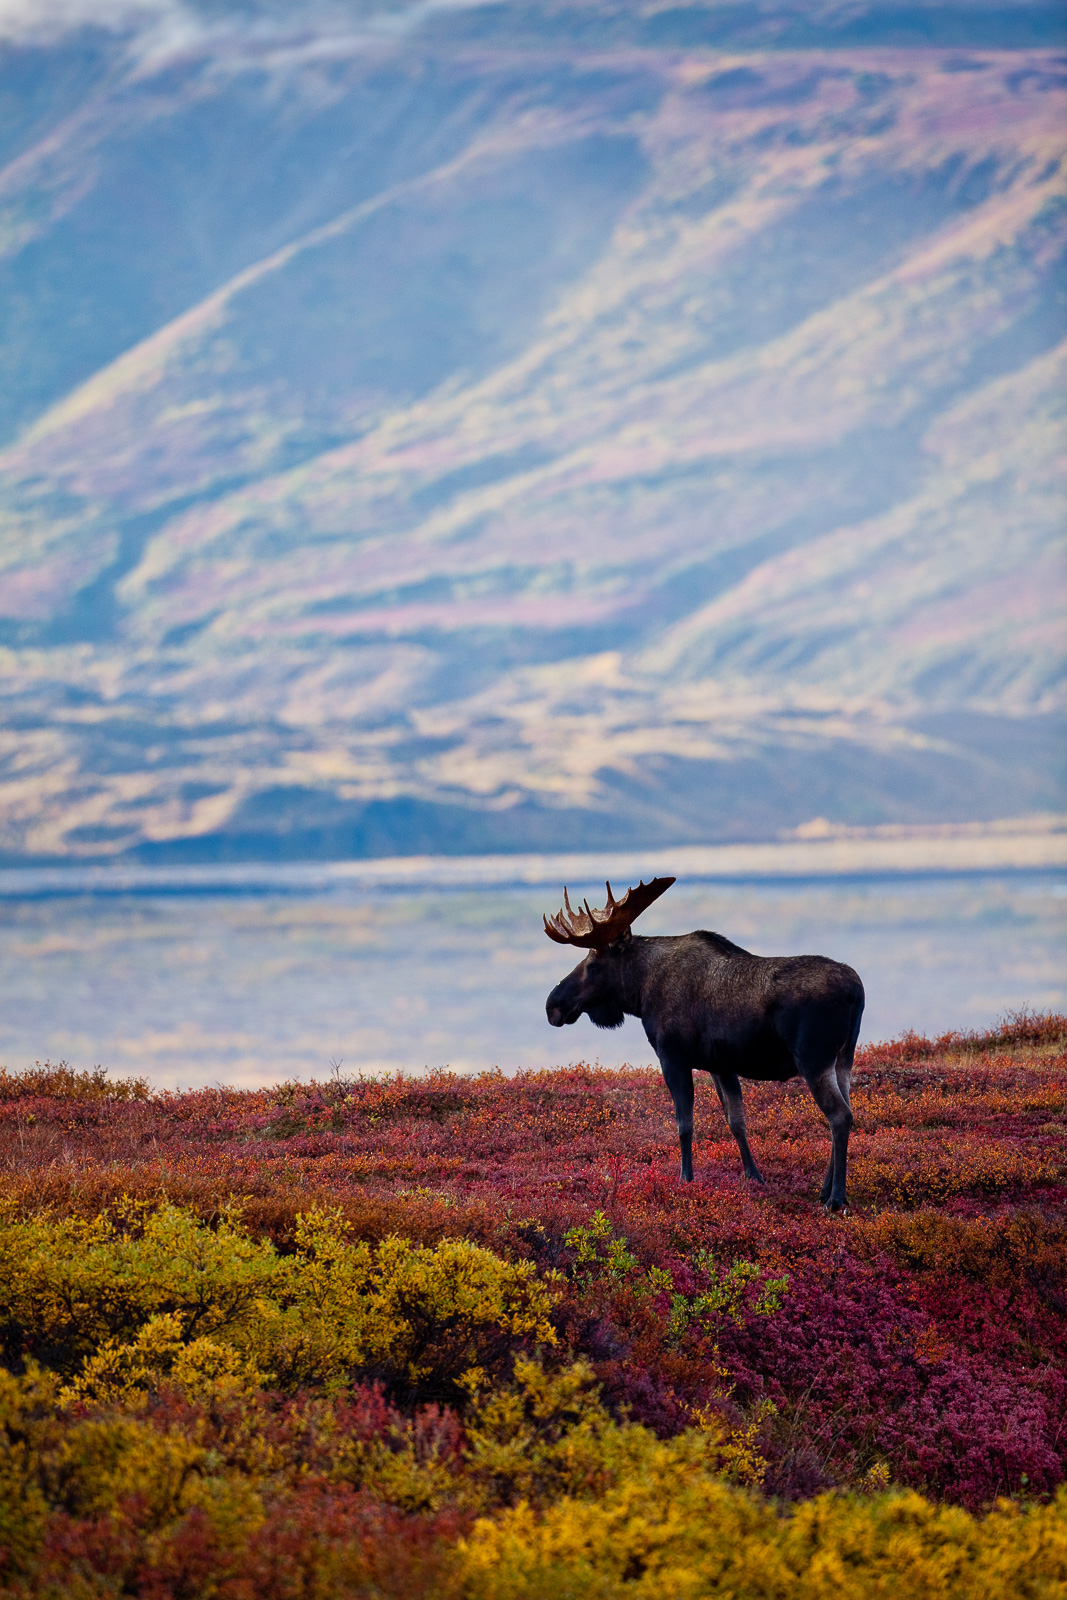 Colorful carpet decorates this moose's home in Denali National Park.